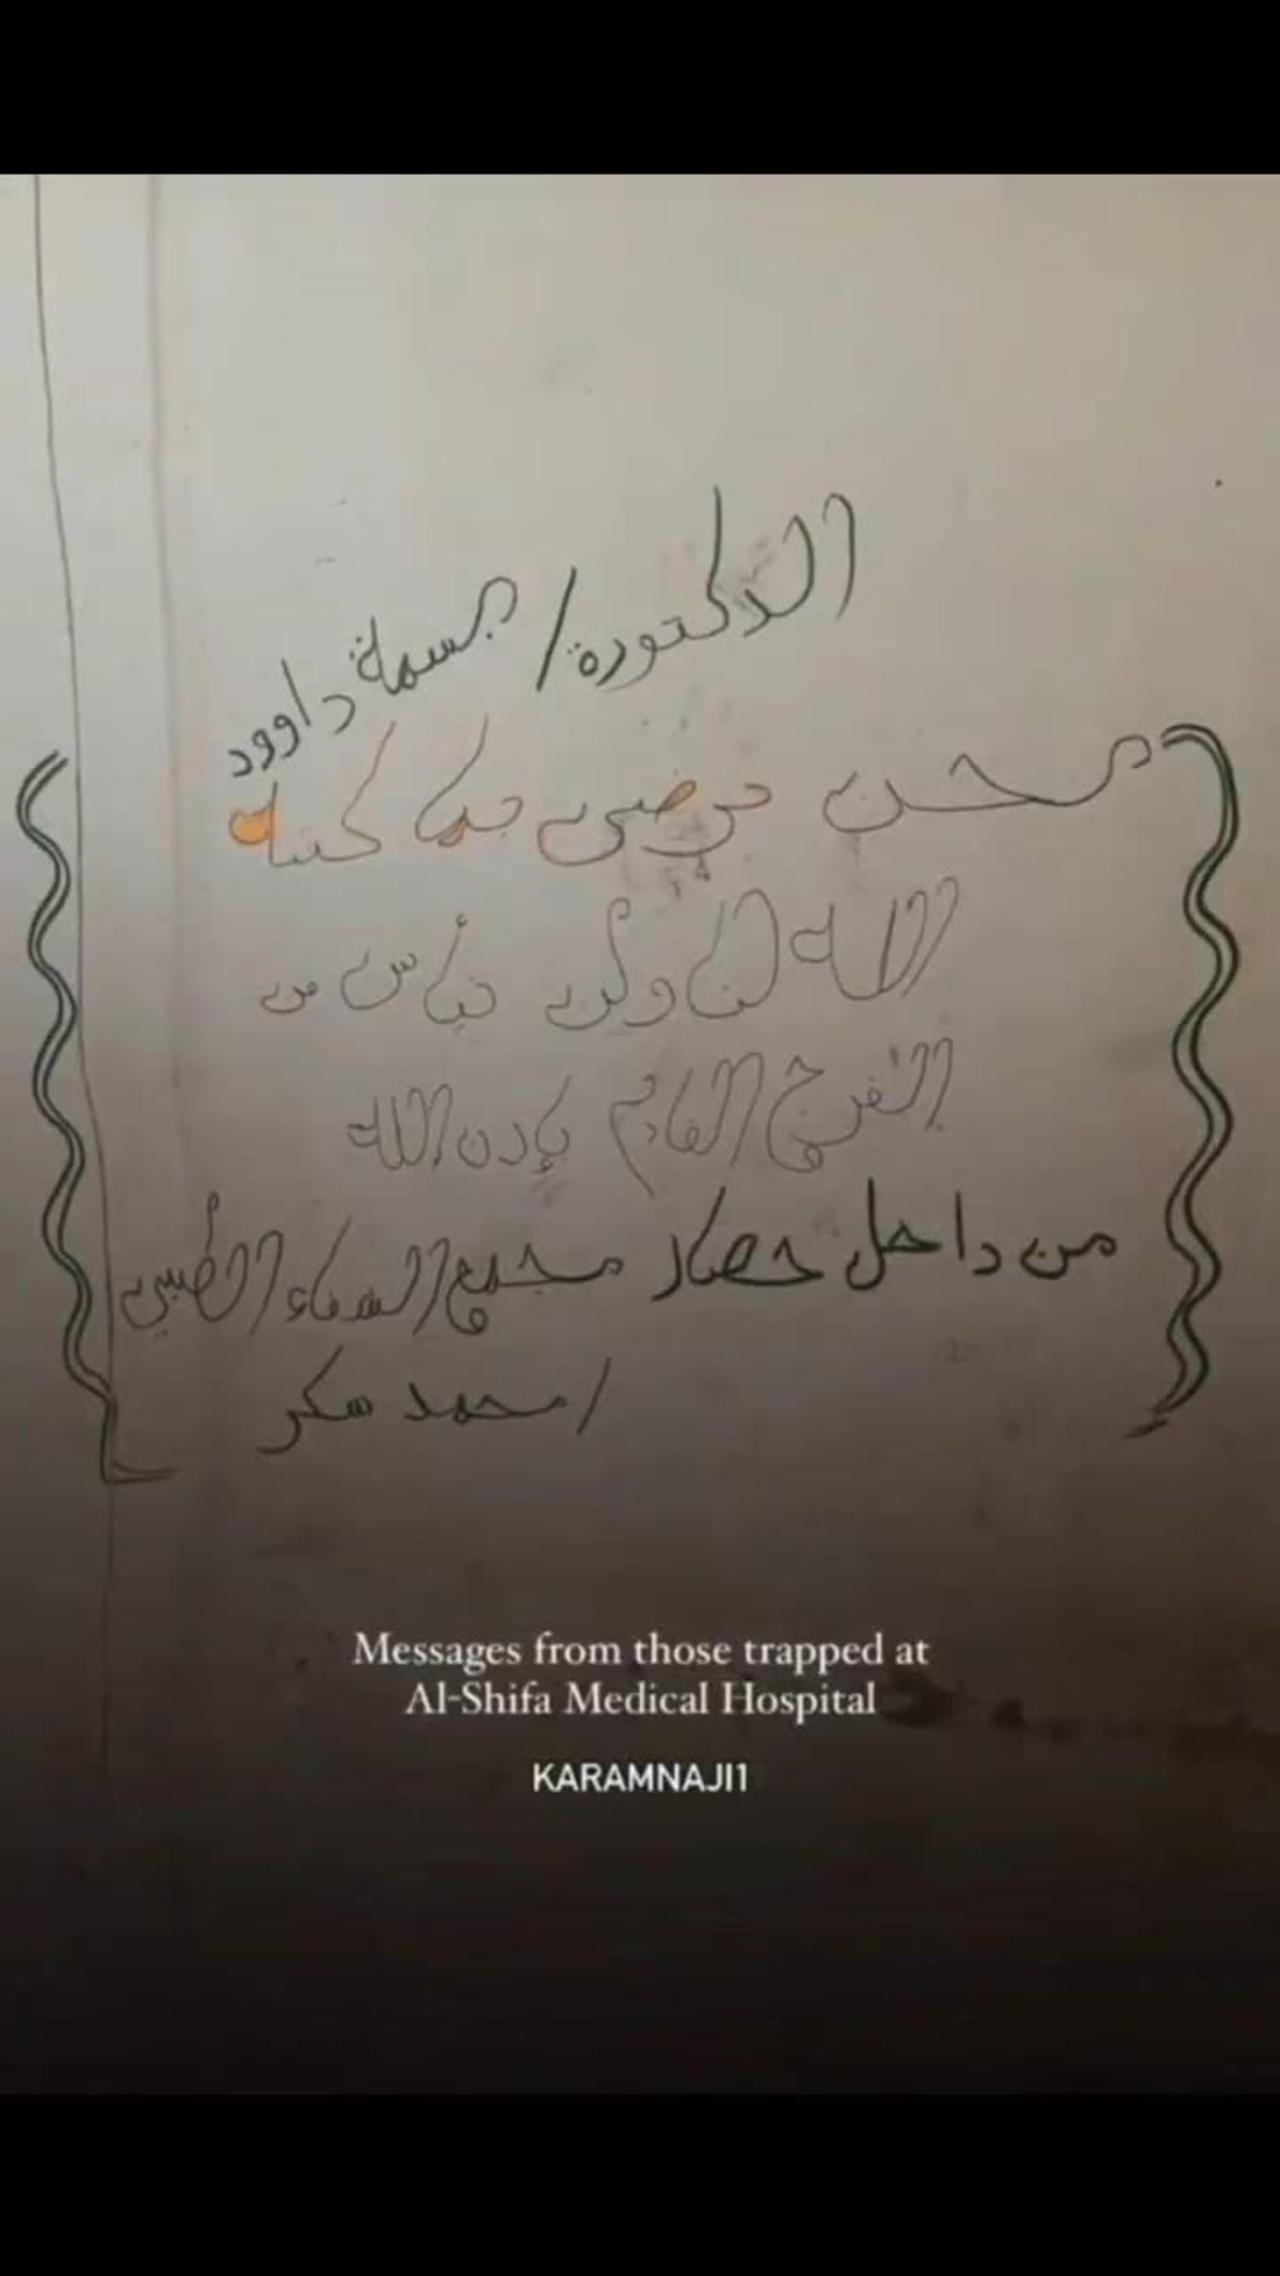 Messages from beyond the grave - Al-Shifa hospital